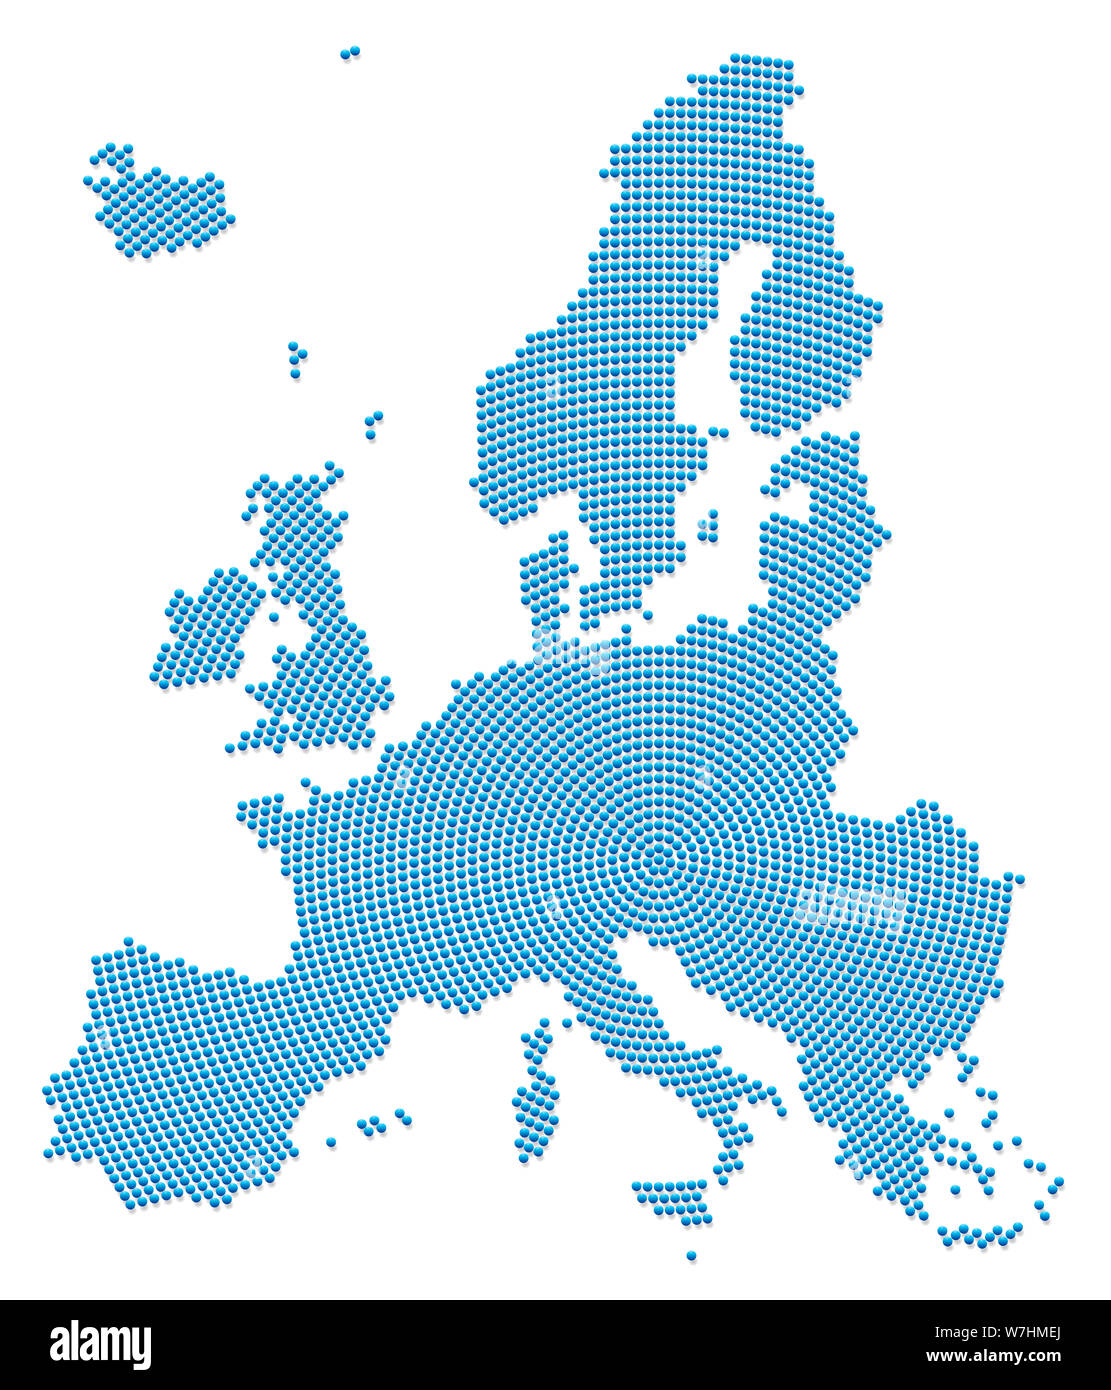 Europe map. Blue pattern with 3d iron beads going radial outwards from the center to form the silhouette of the EU area . illustration on white. Stock Photo